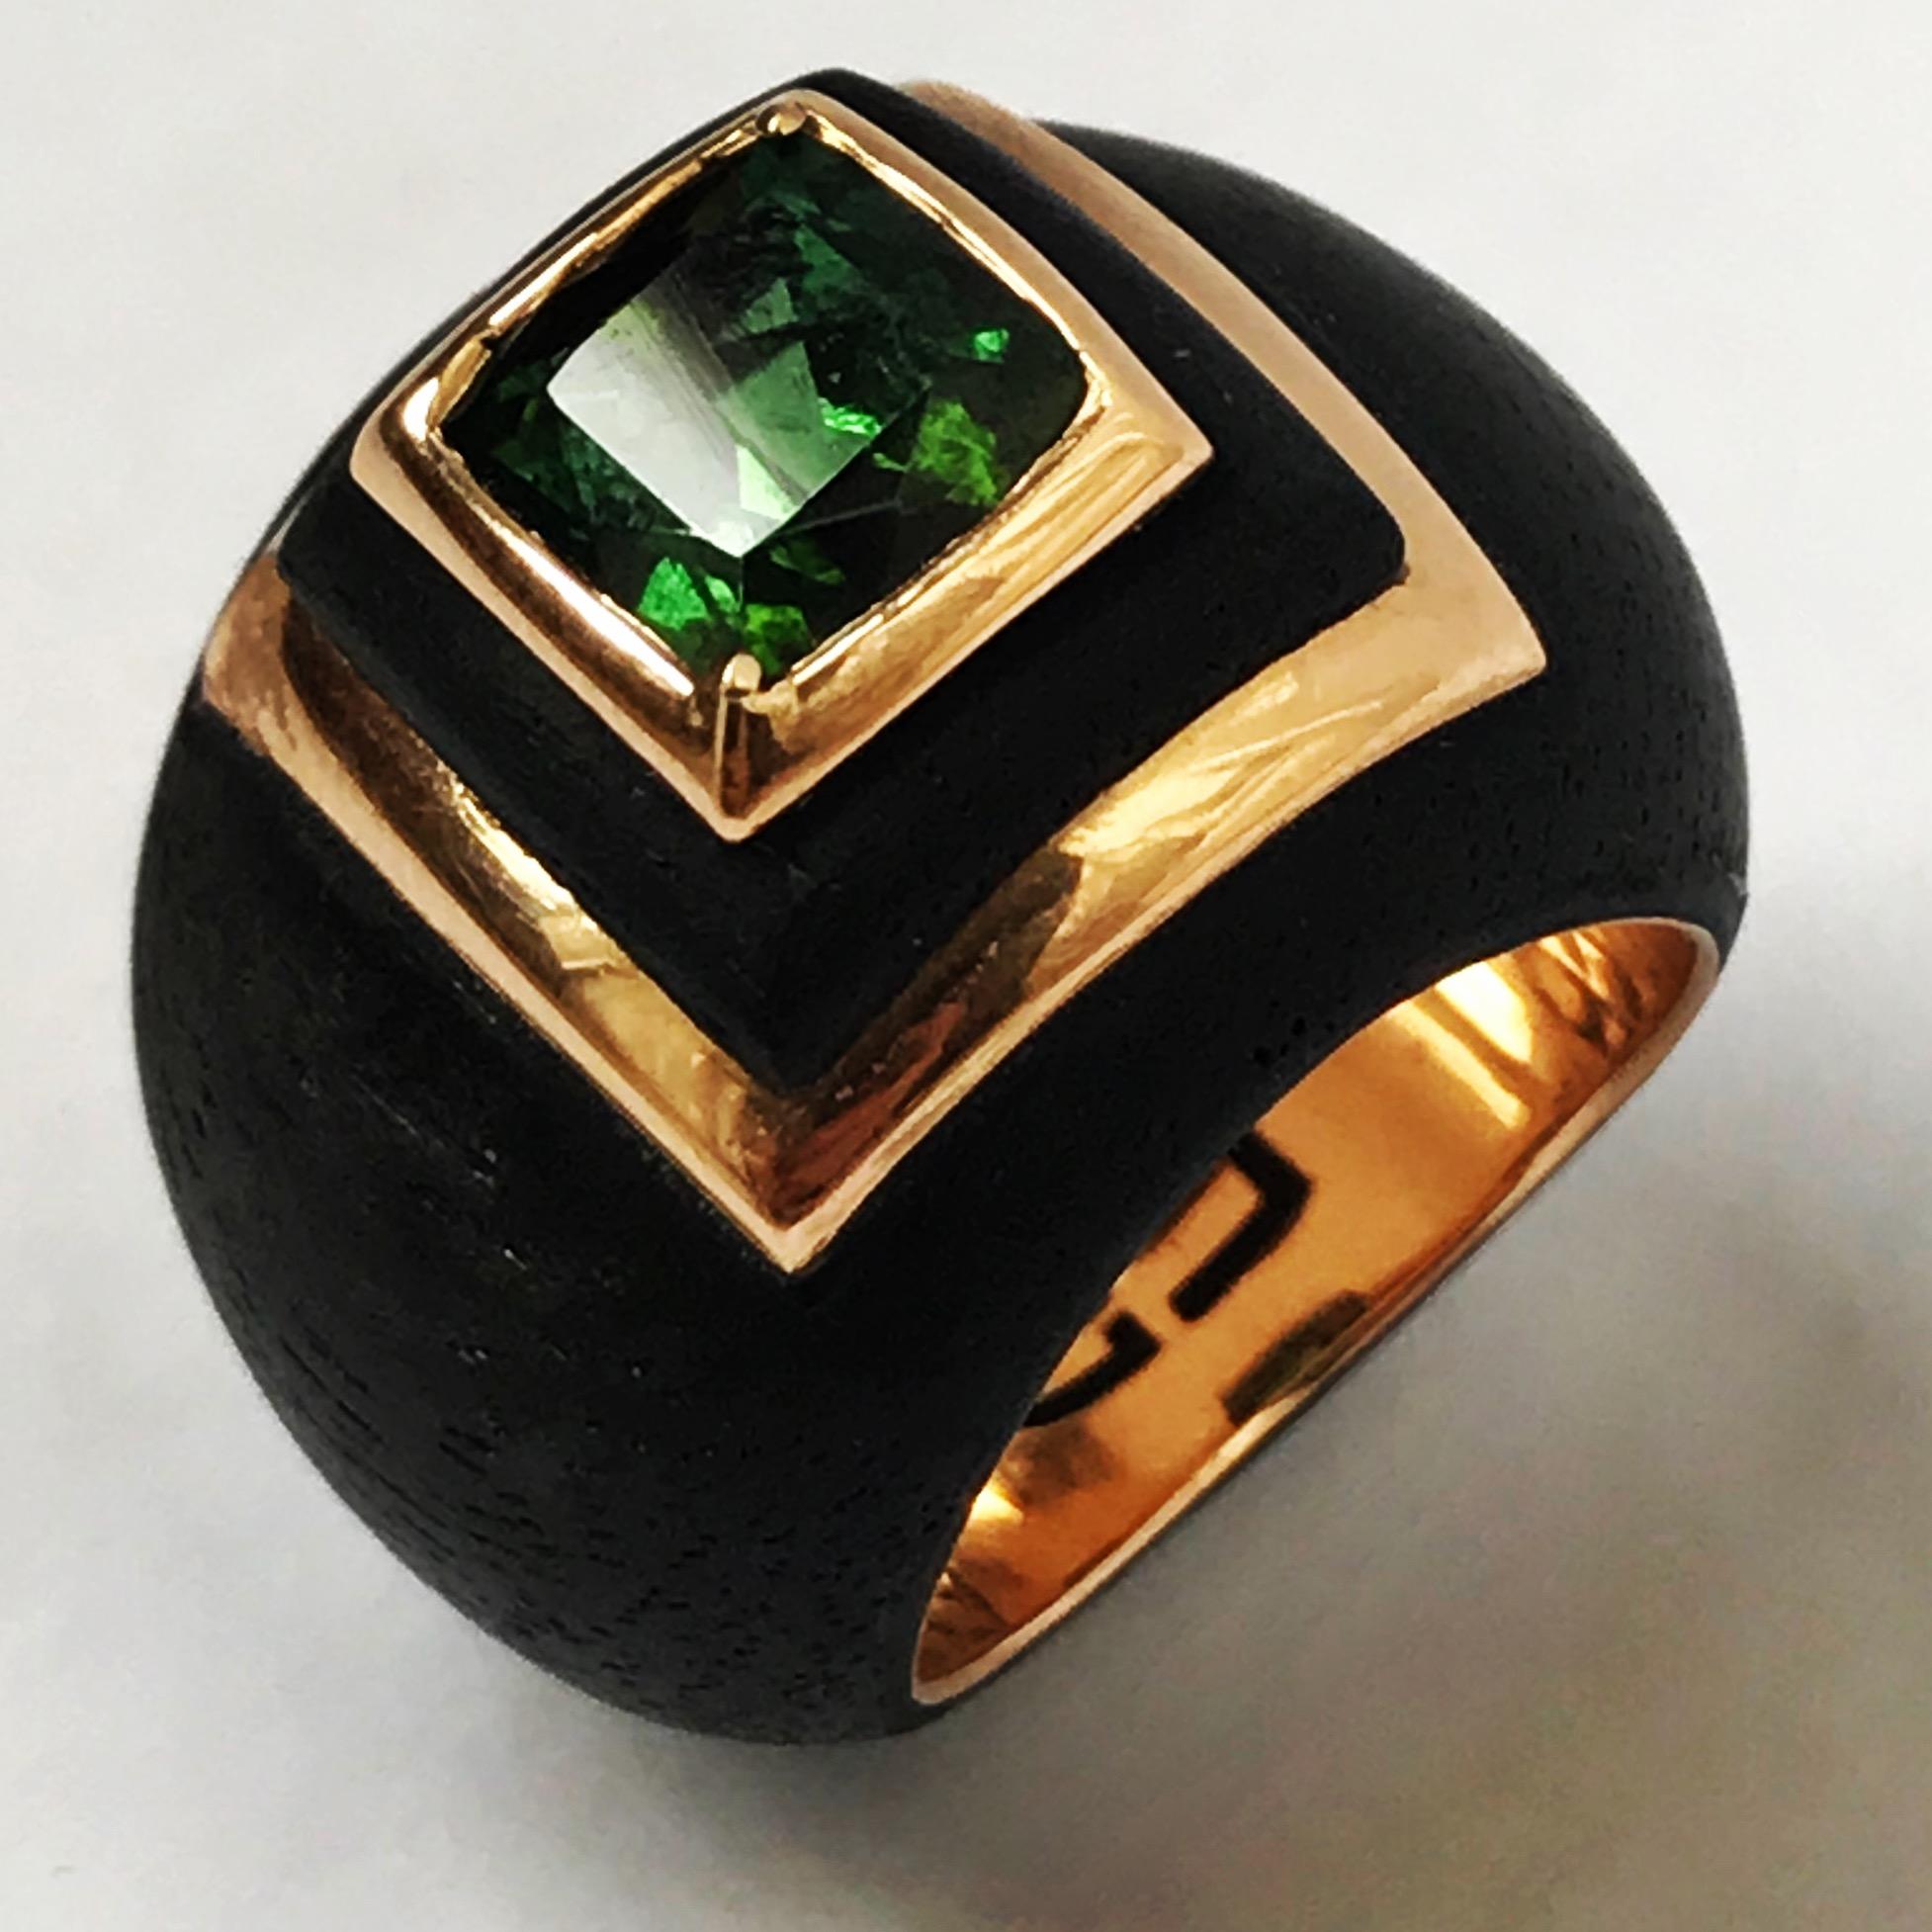 Green tourmaline, 18K rose gold and ebony pinky ring by Frederique Berman.
Ebony and rose gold dome ring, set with a 2.12 carat emerald cut green tourmaline.
Inspired by 